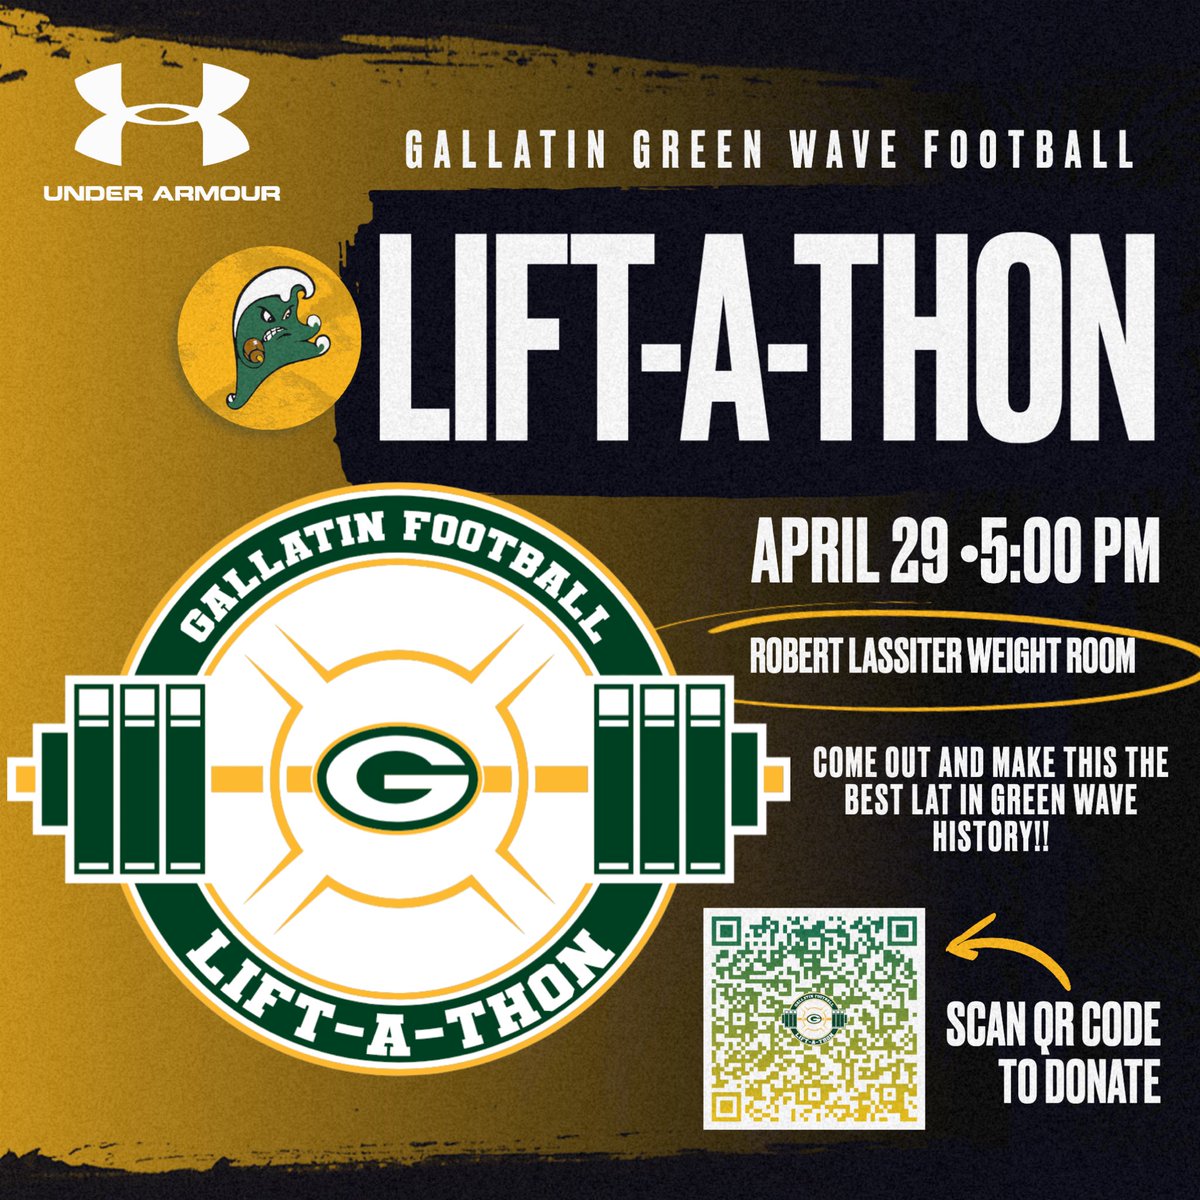 Gallatin Green Wave Annual Lift-A-Thon on Monday April 29th at 5pm. Feel free to reach out to your favorite Green Wave to sponsor him and come out to see the hard work our guys have put in this offseason!